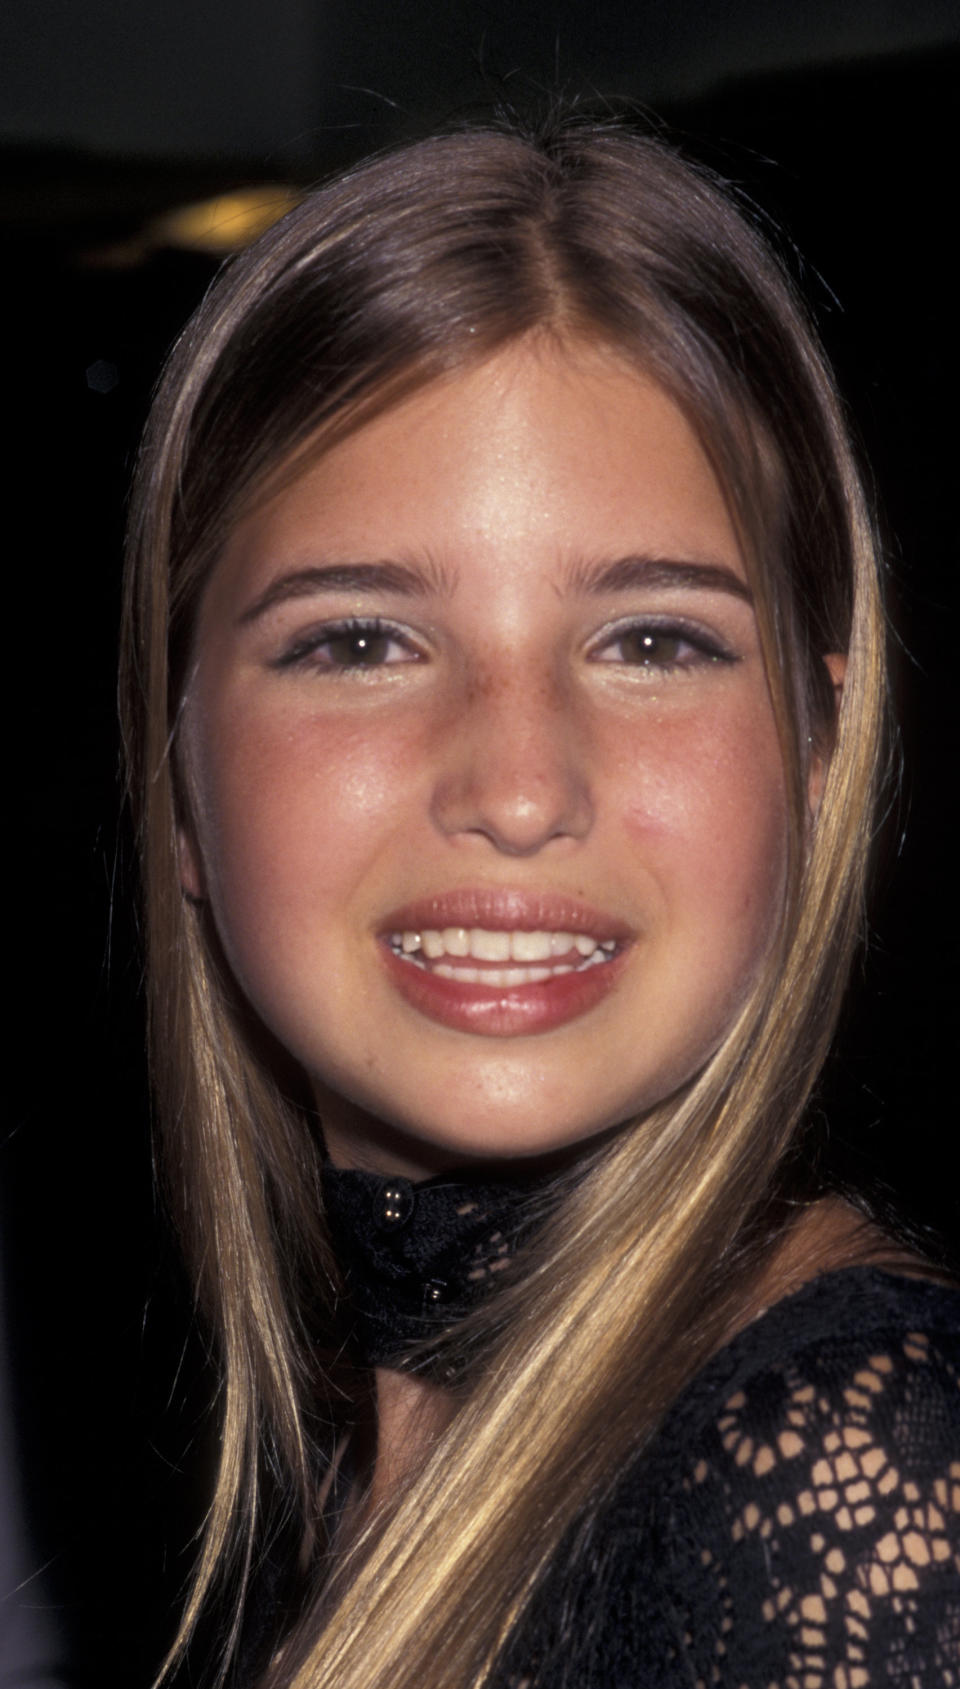 Ivanka Trump attends 50th Birthday Party for Donald Trump on June 13, 1996 at Trump Tower in New York City.